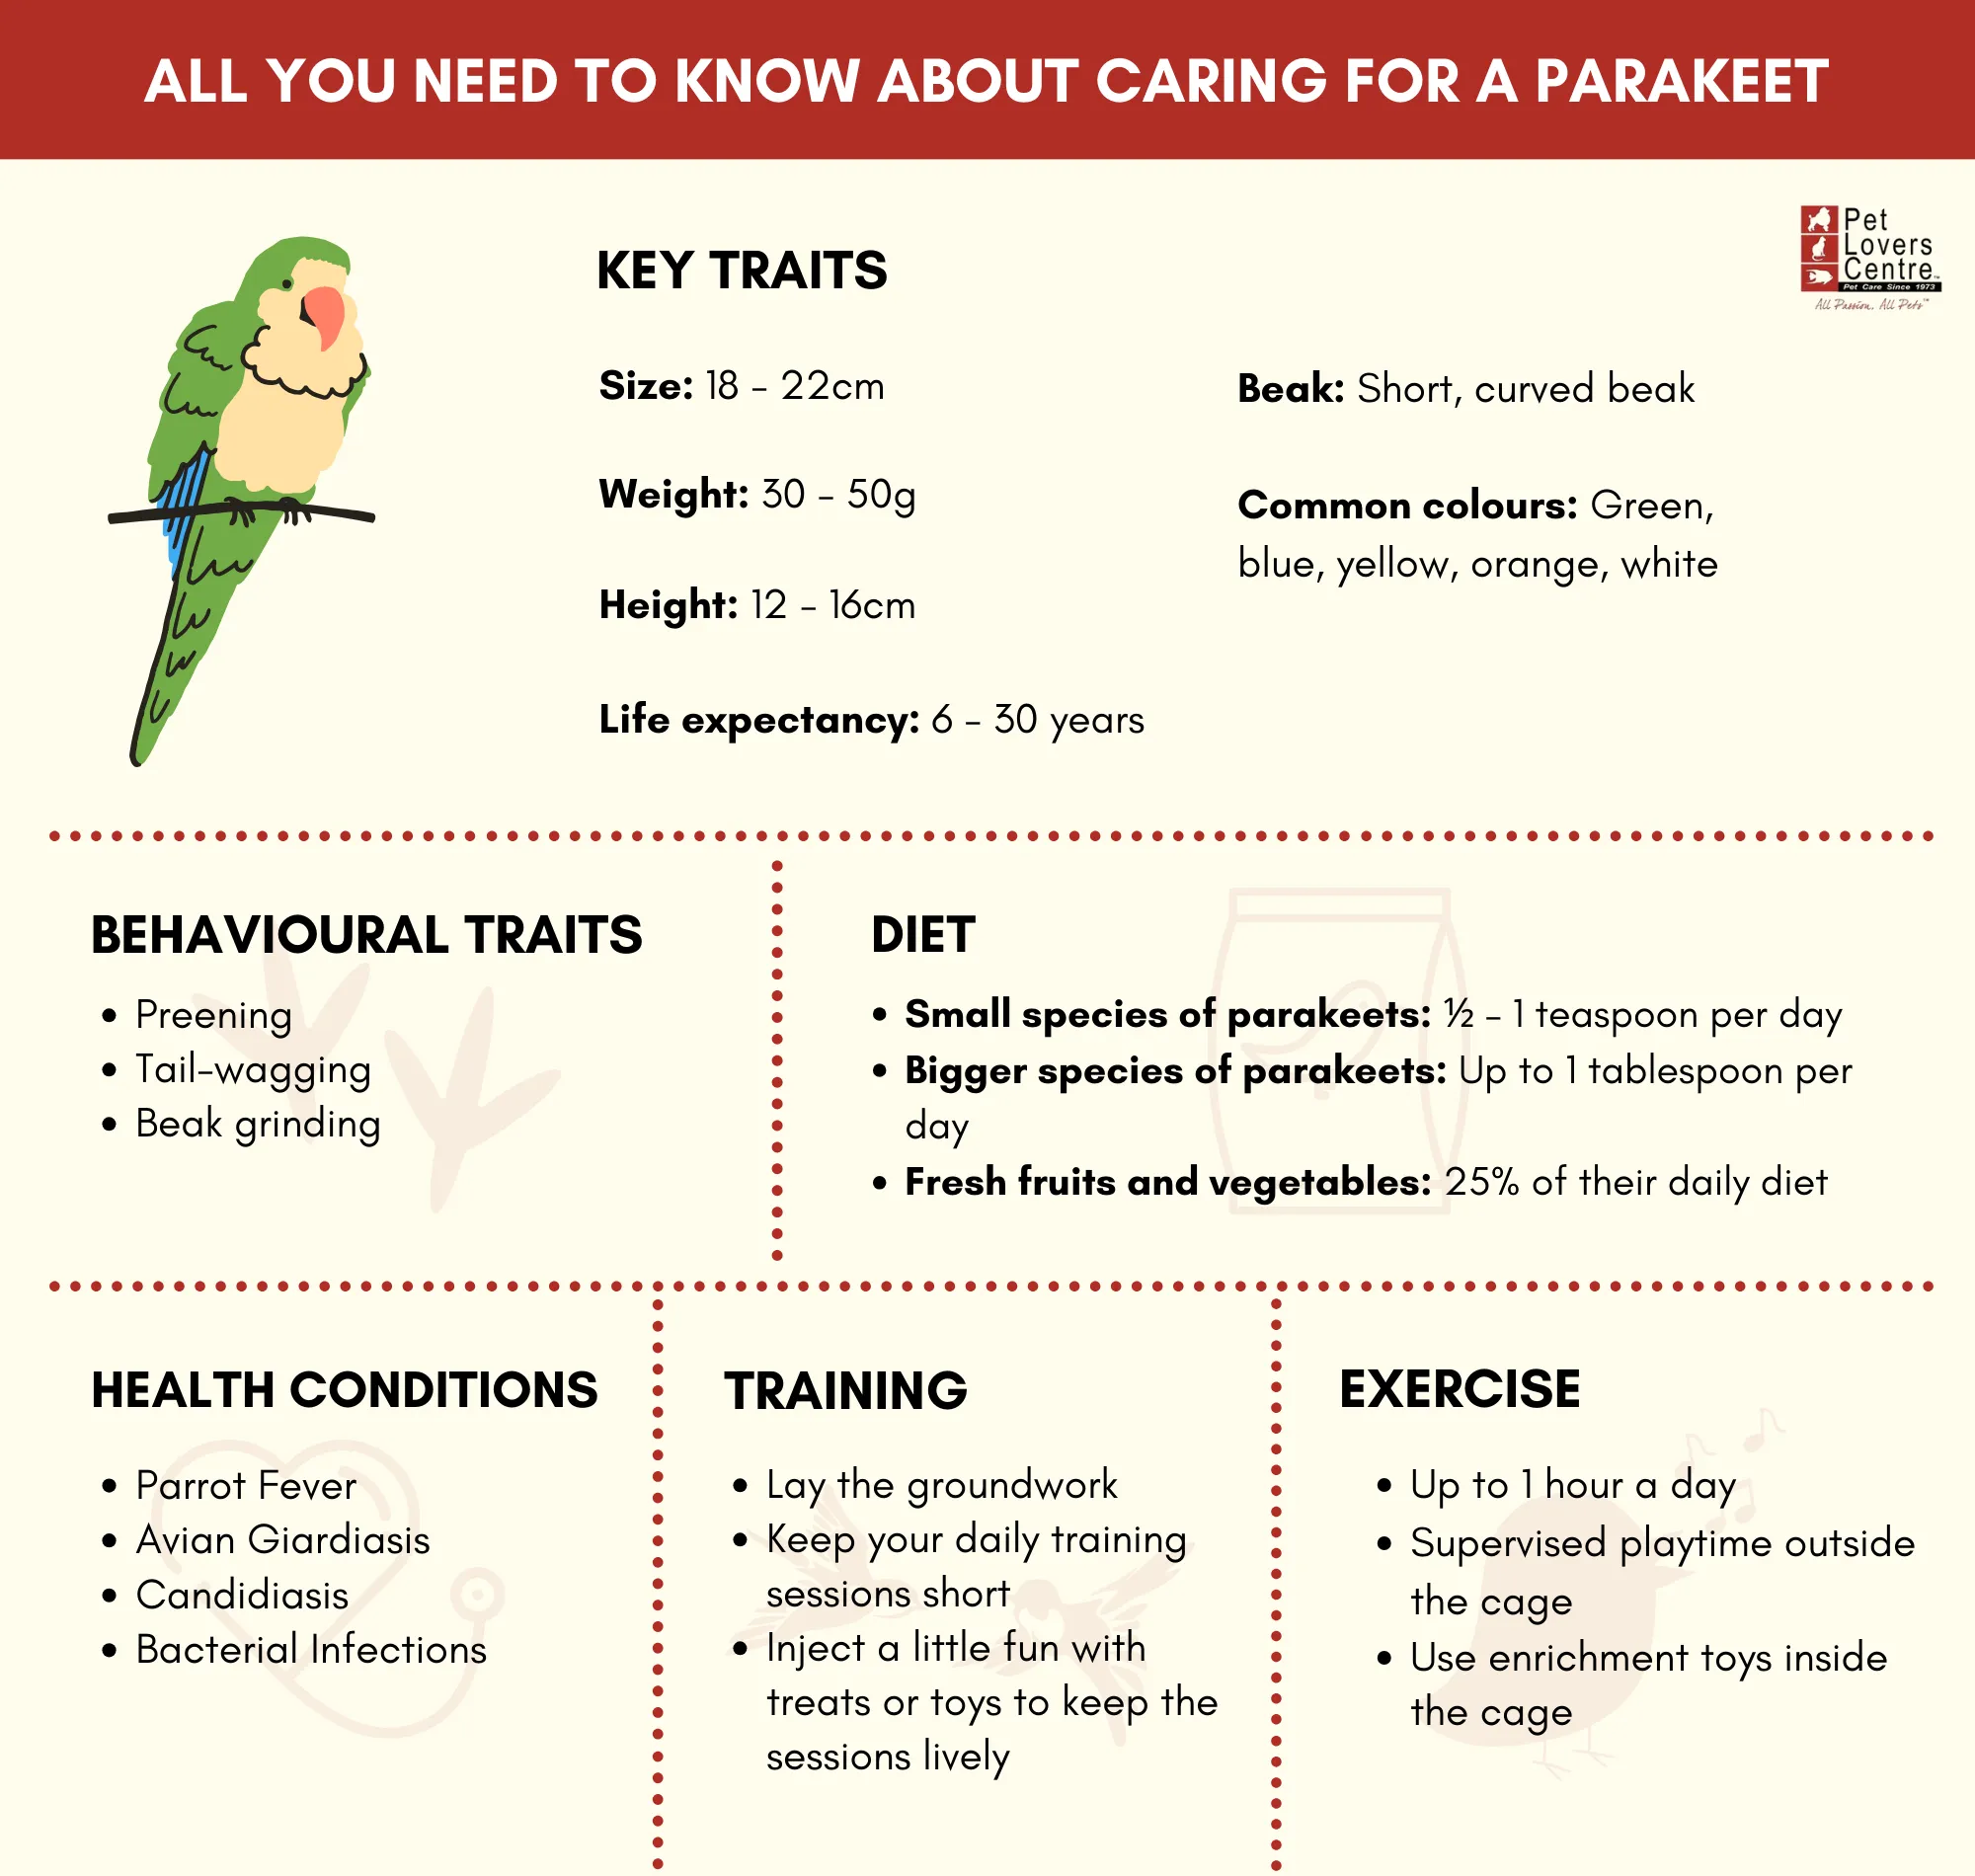 Caring for a Parakeet infographic